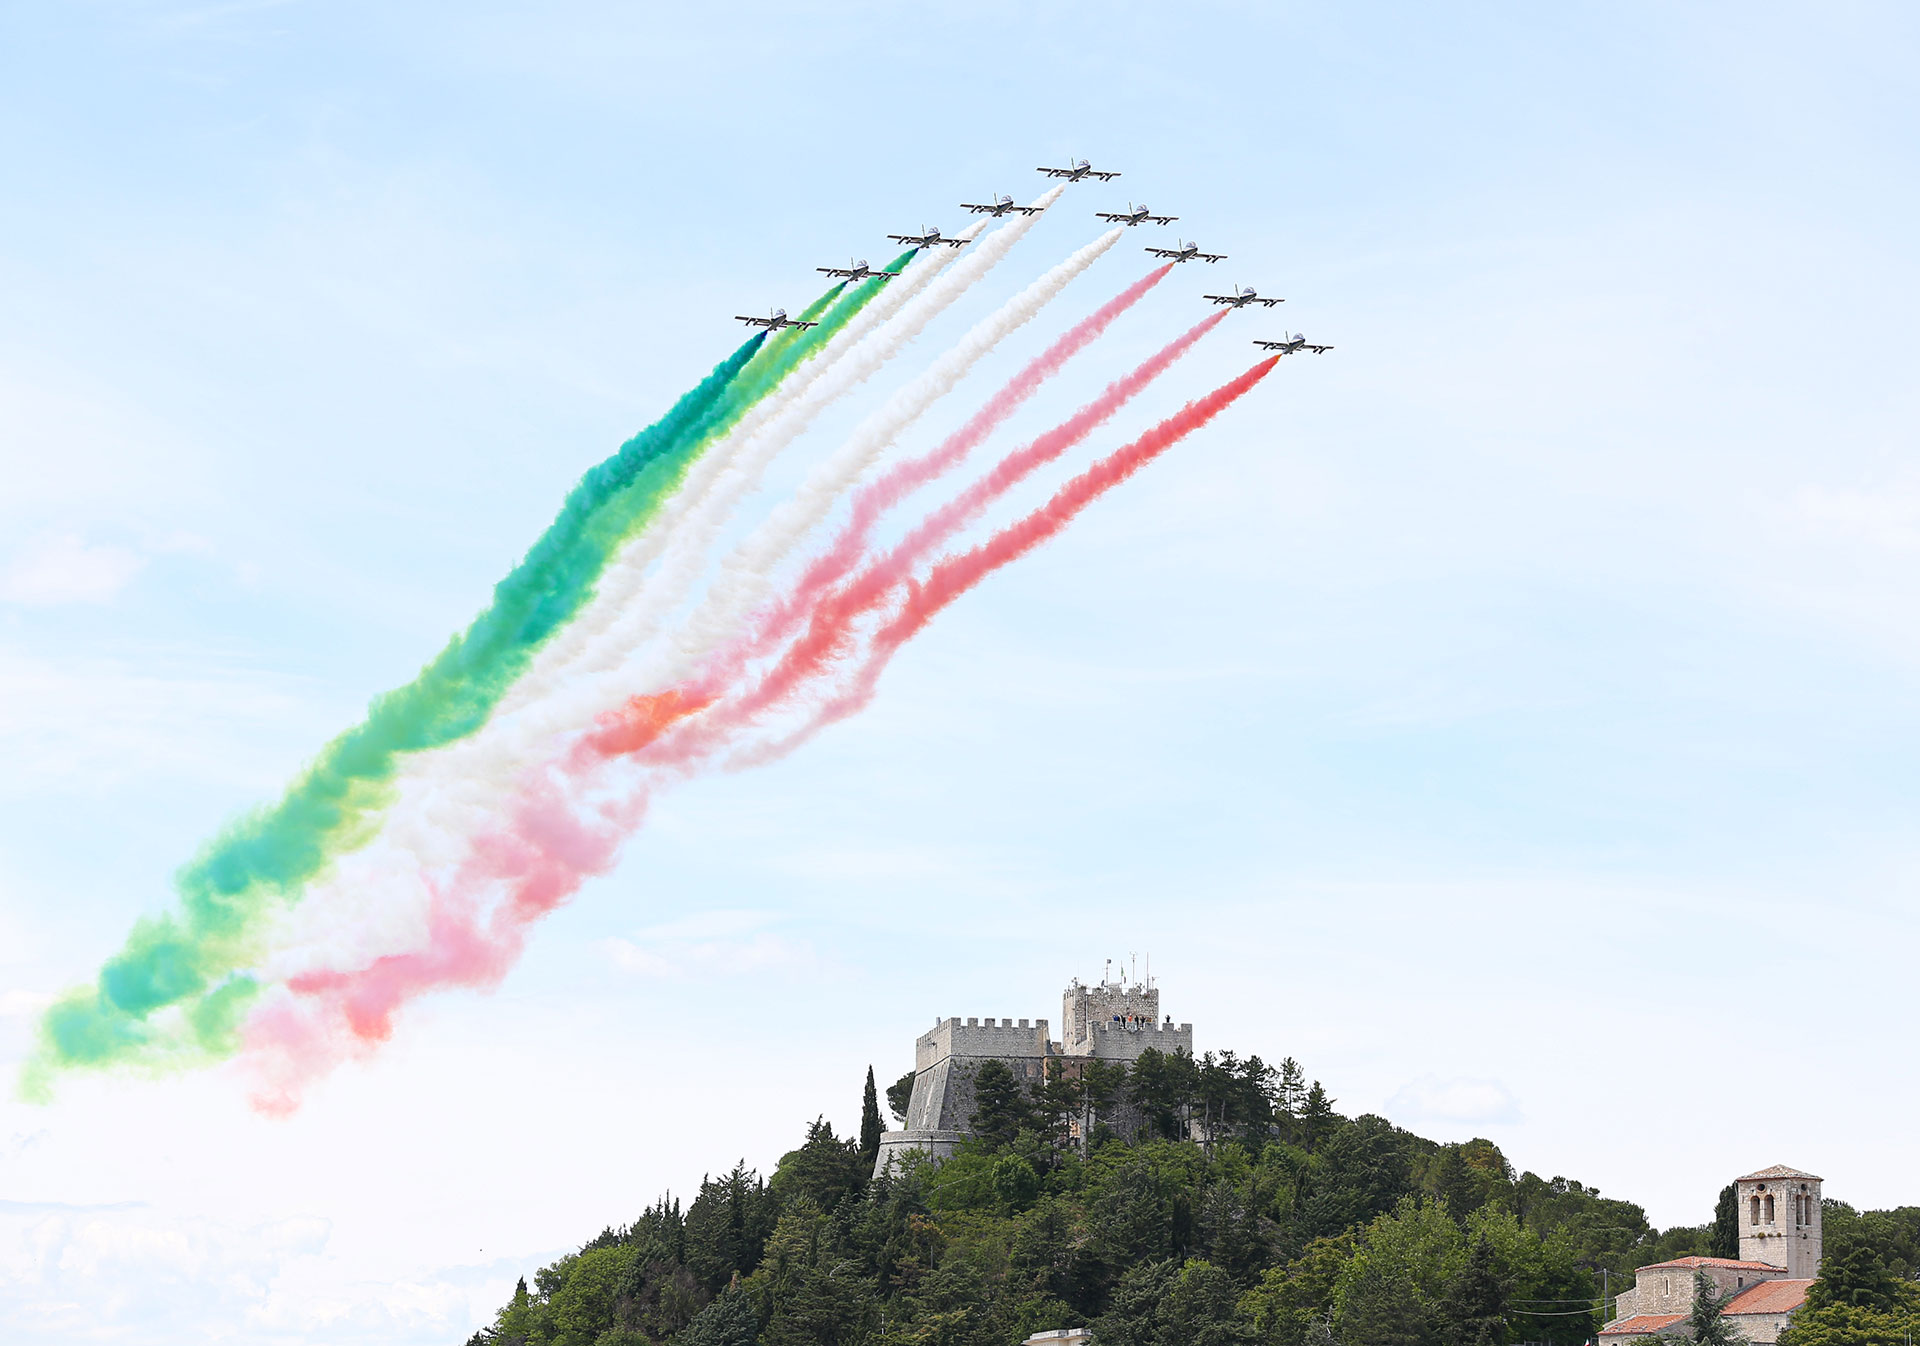 Italy’s aerobatic flight team aeronautica militare (Tricolor Arrows) flies over the Castello Monforte as part of the celebration for the 74th anniversary of the proclamation of the Italian Republic in Campobasso, Italy. May 28, 2020-Laura Venezia